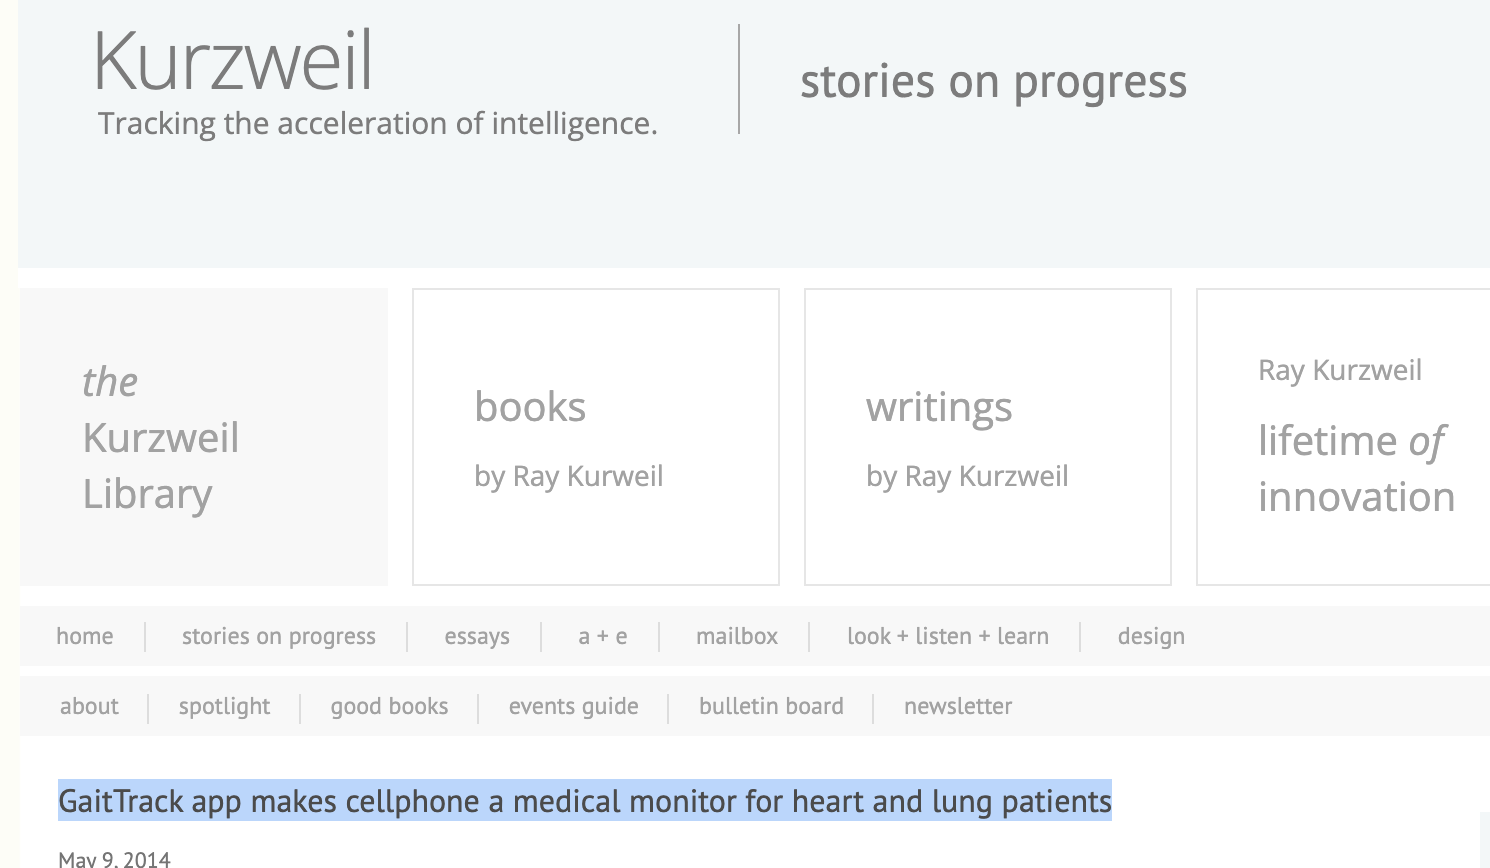 GaitTrack app makes cellphone a medical monitor for heart and lung patients, Kurzweil